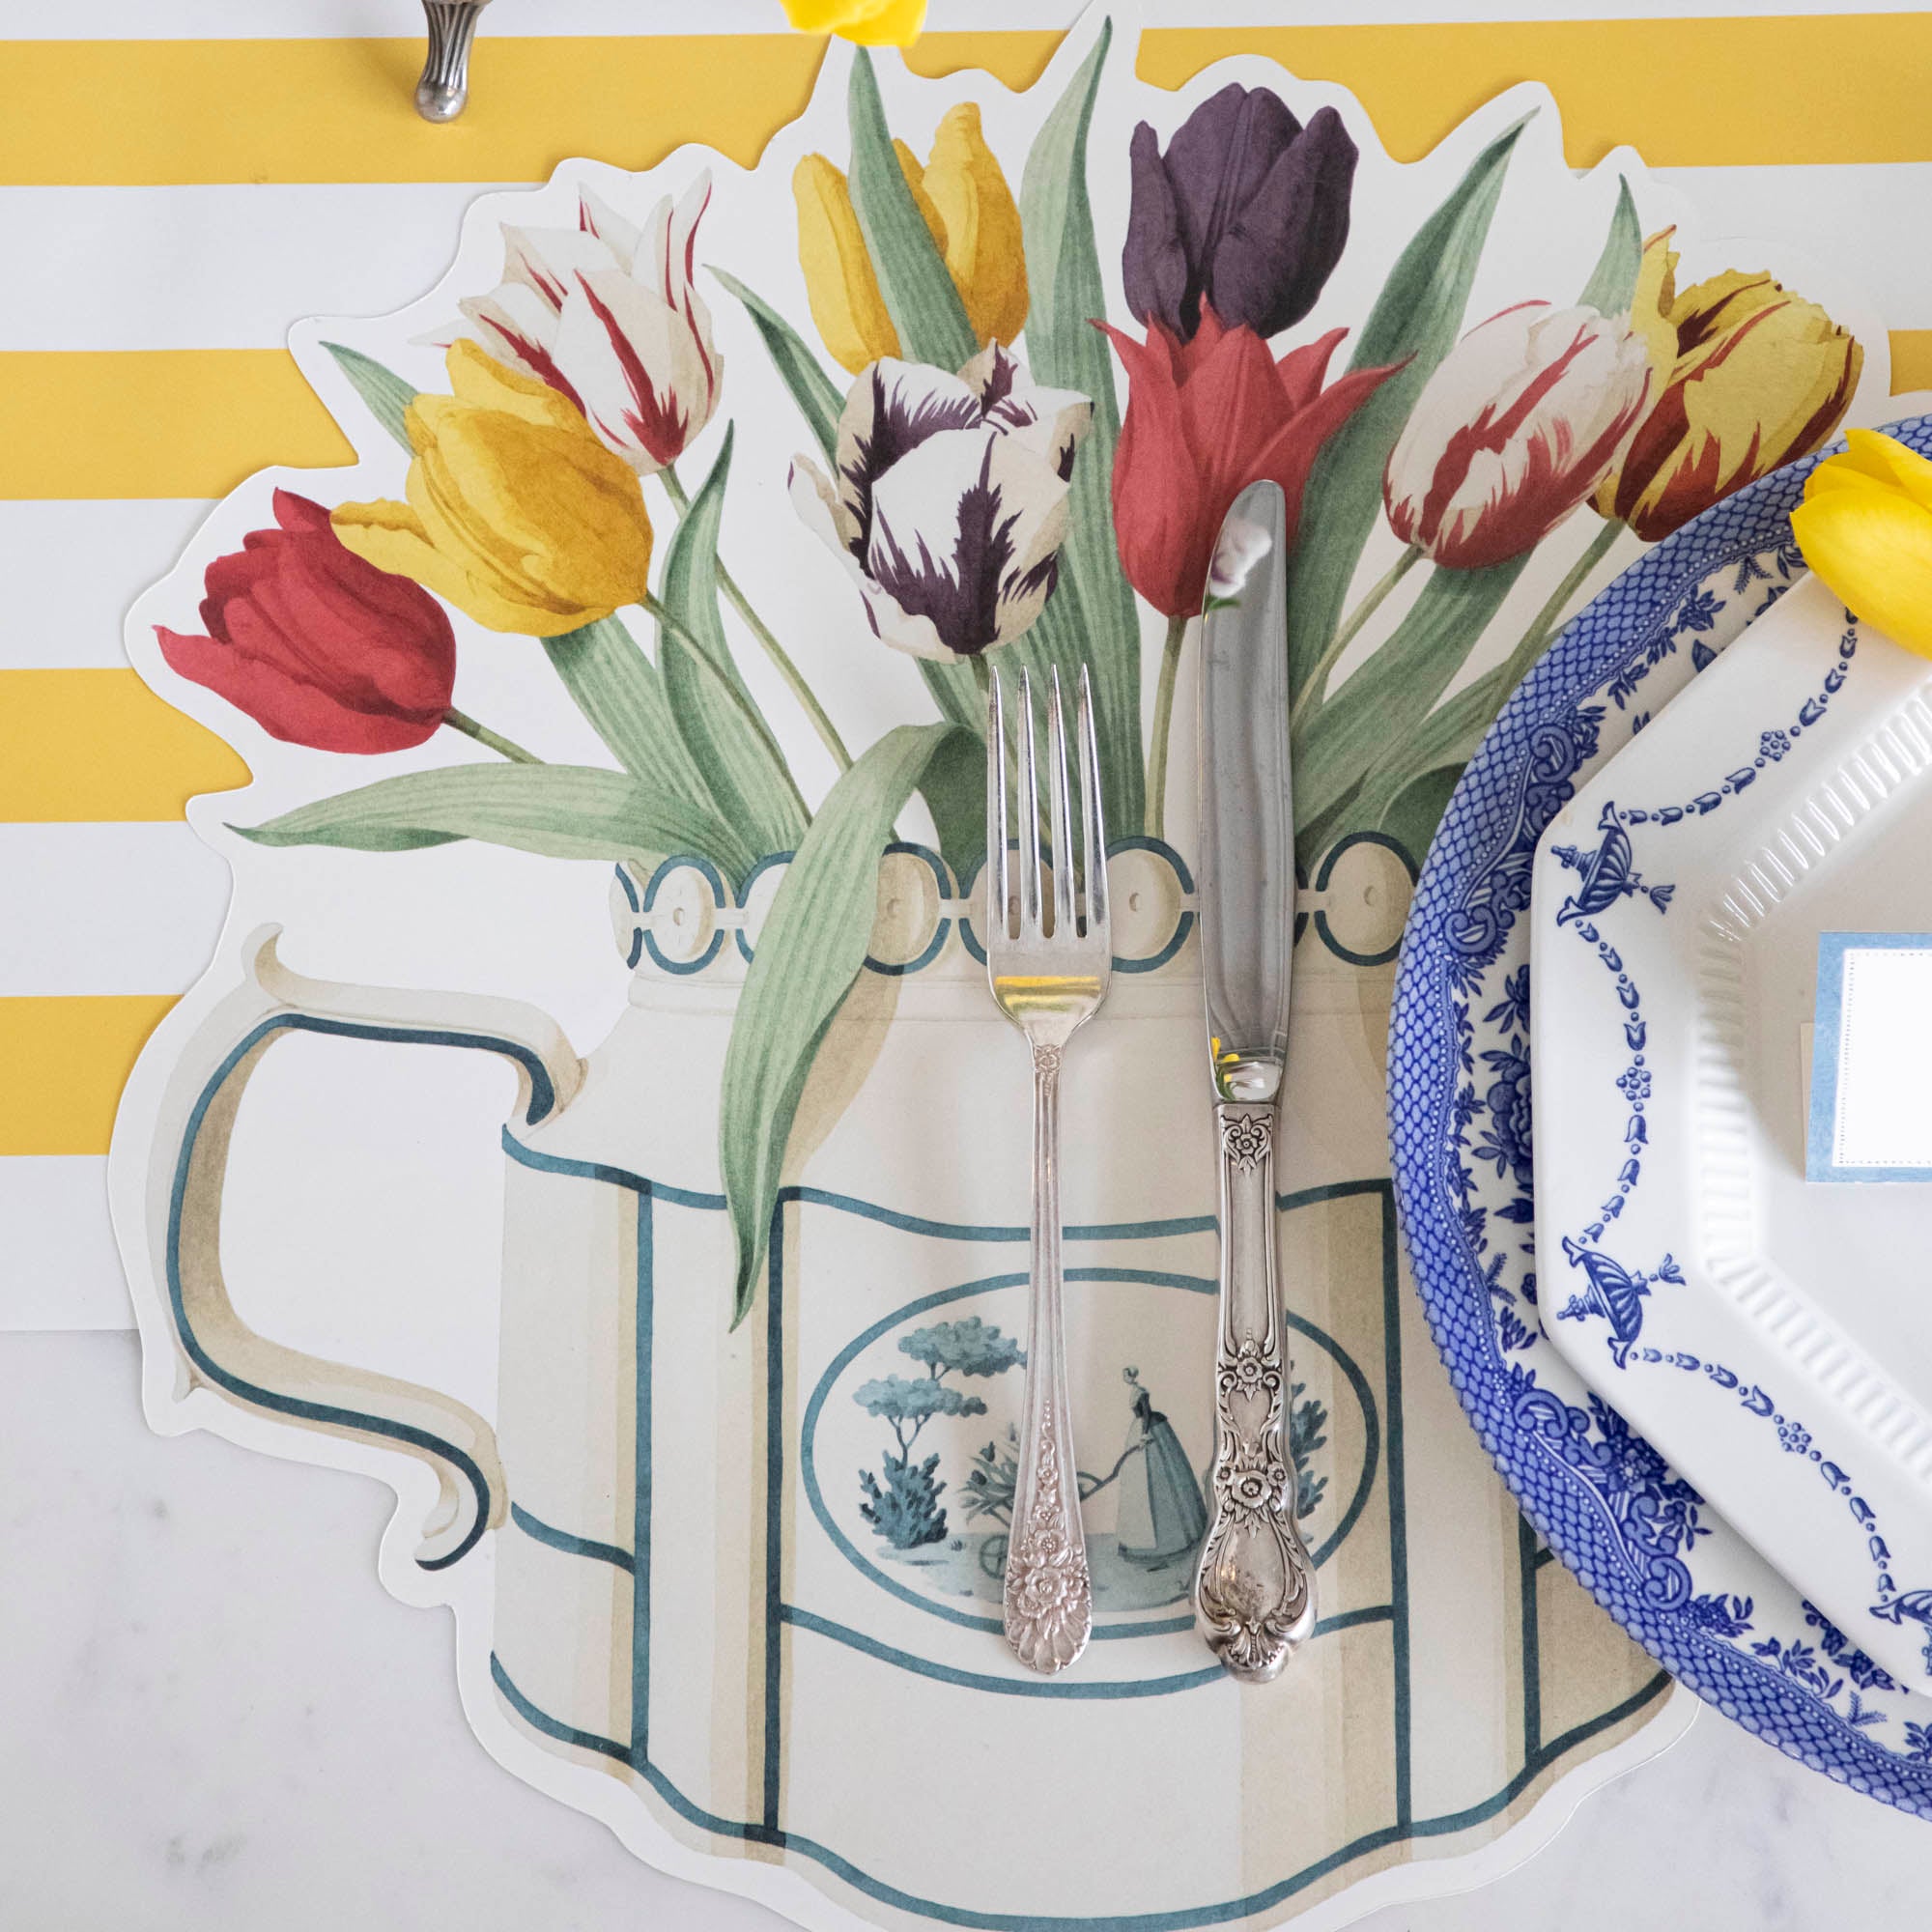 The Die-cut Tulip Teapot Placemat under an elegant springtime place setting, from above.